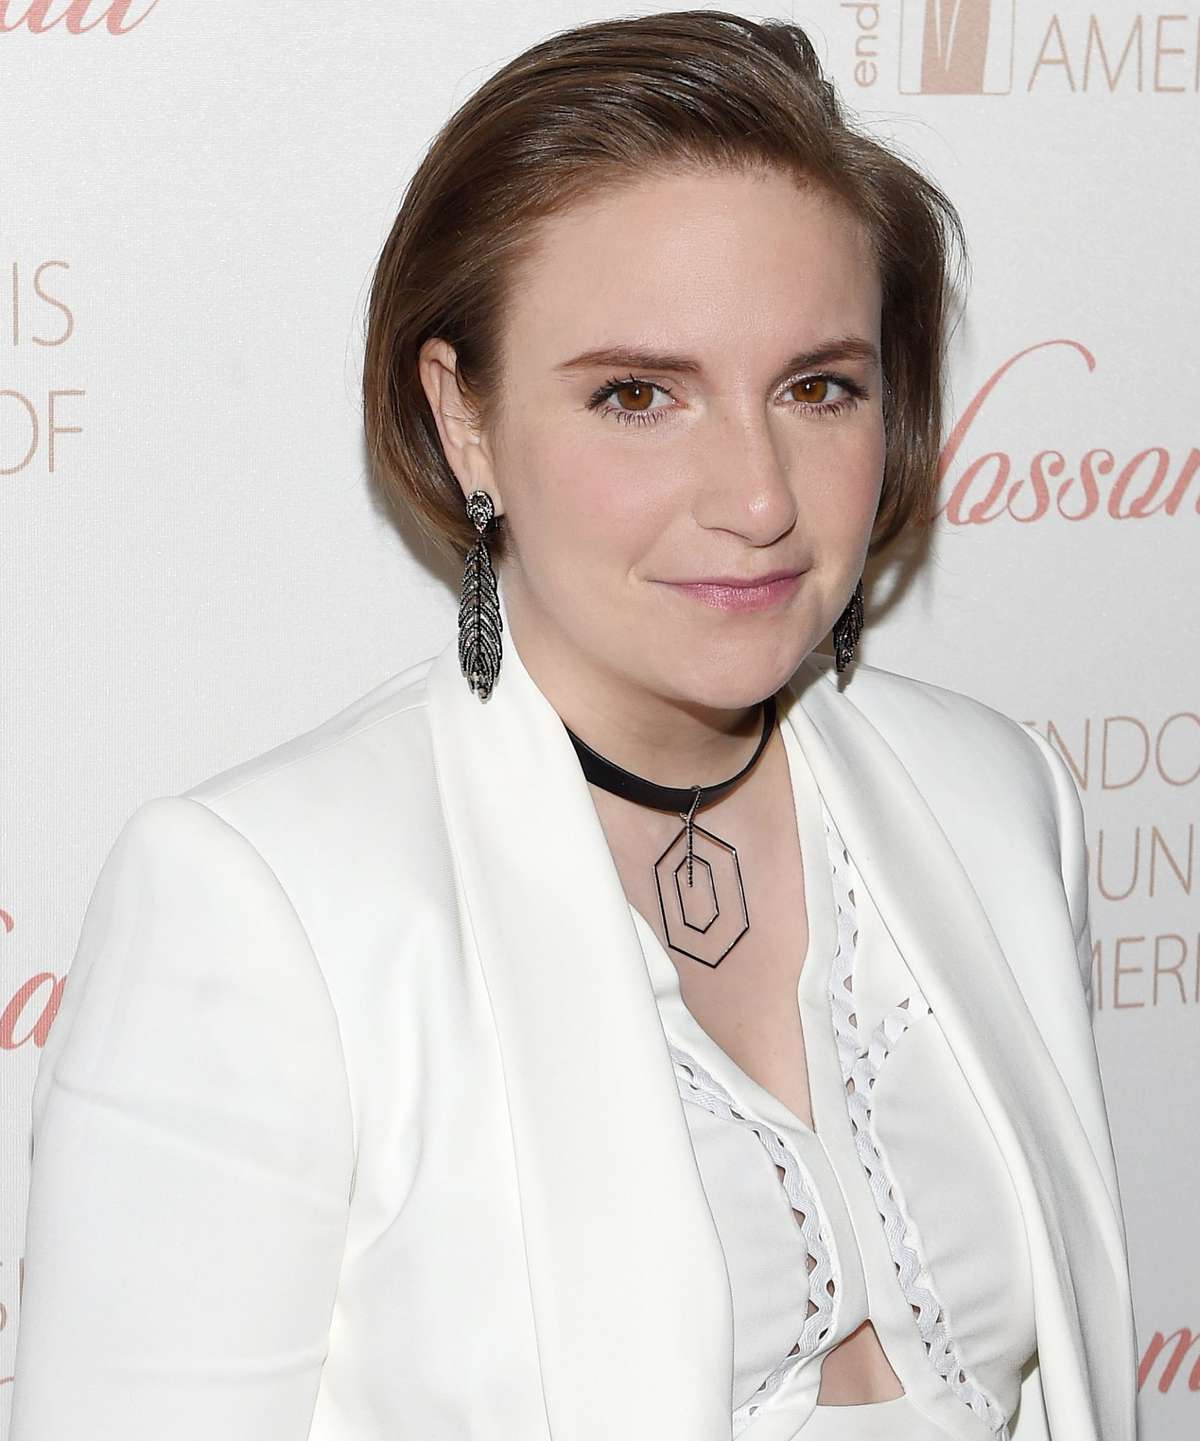 Lena Dunham is not that kind of girl